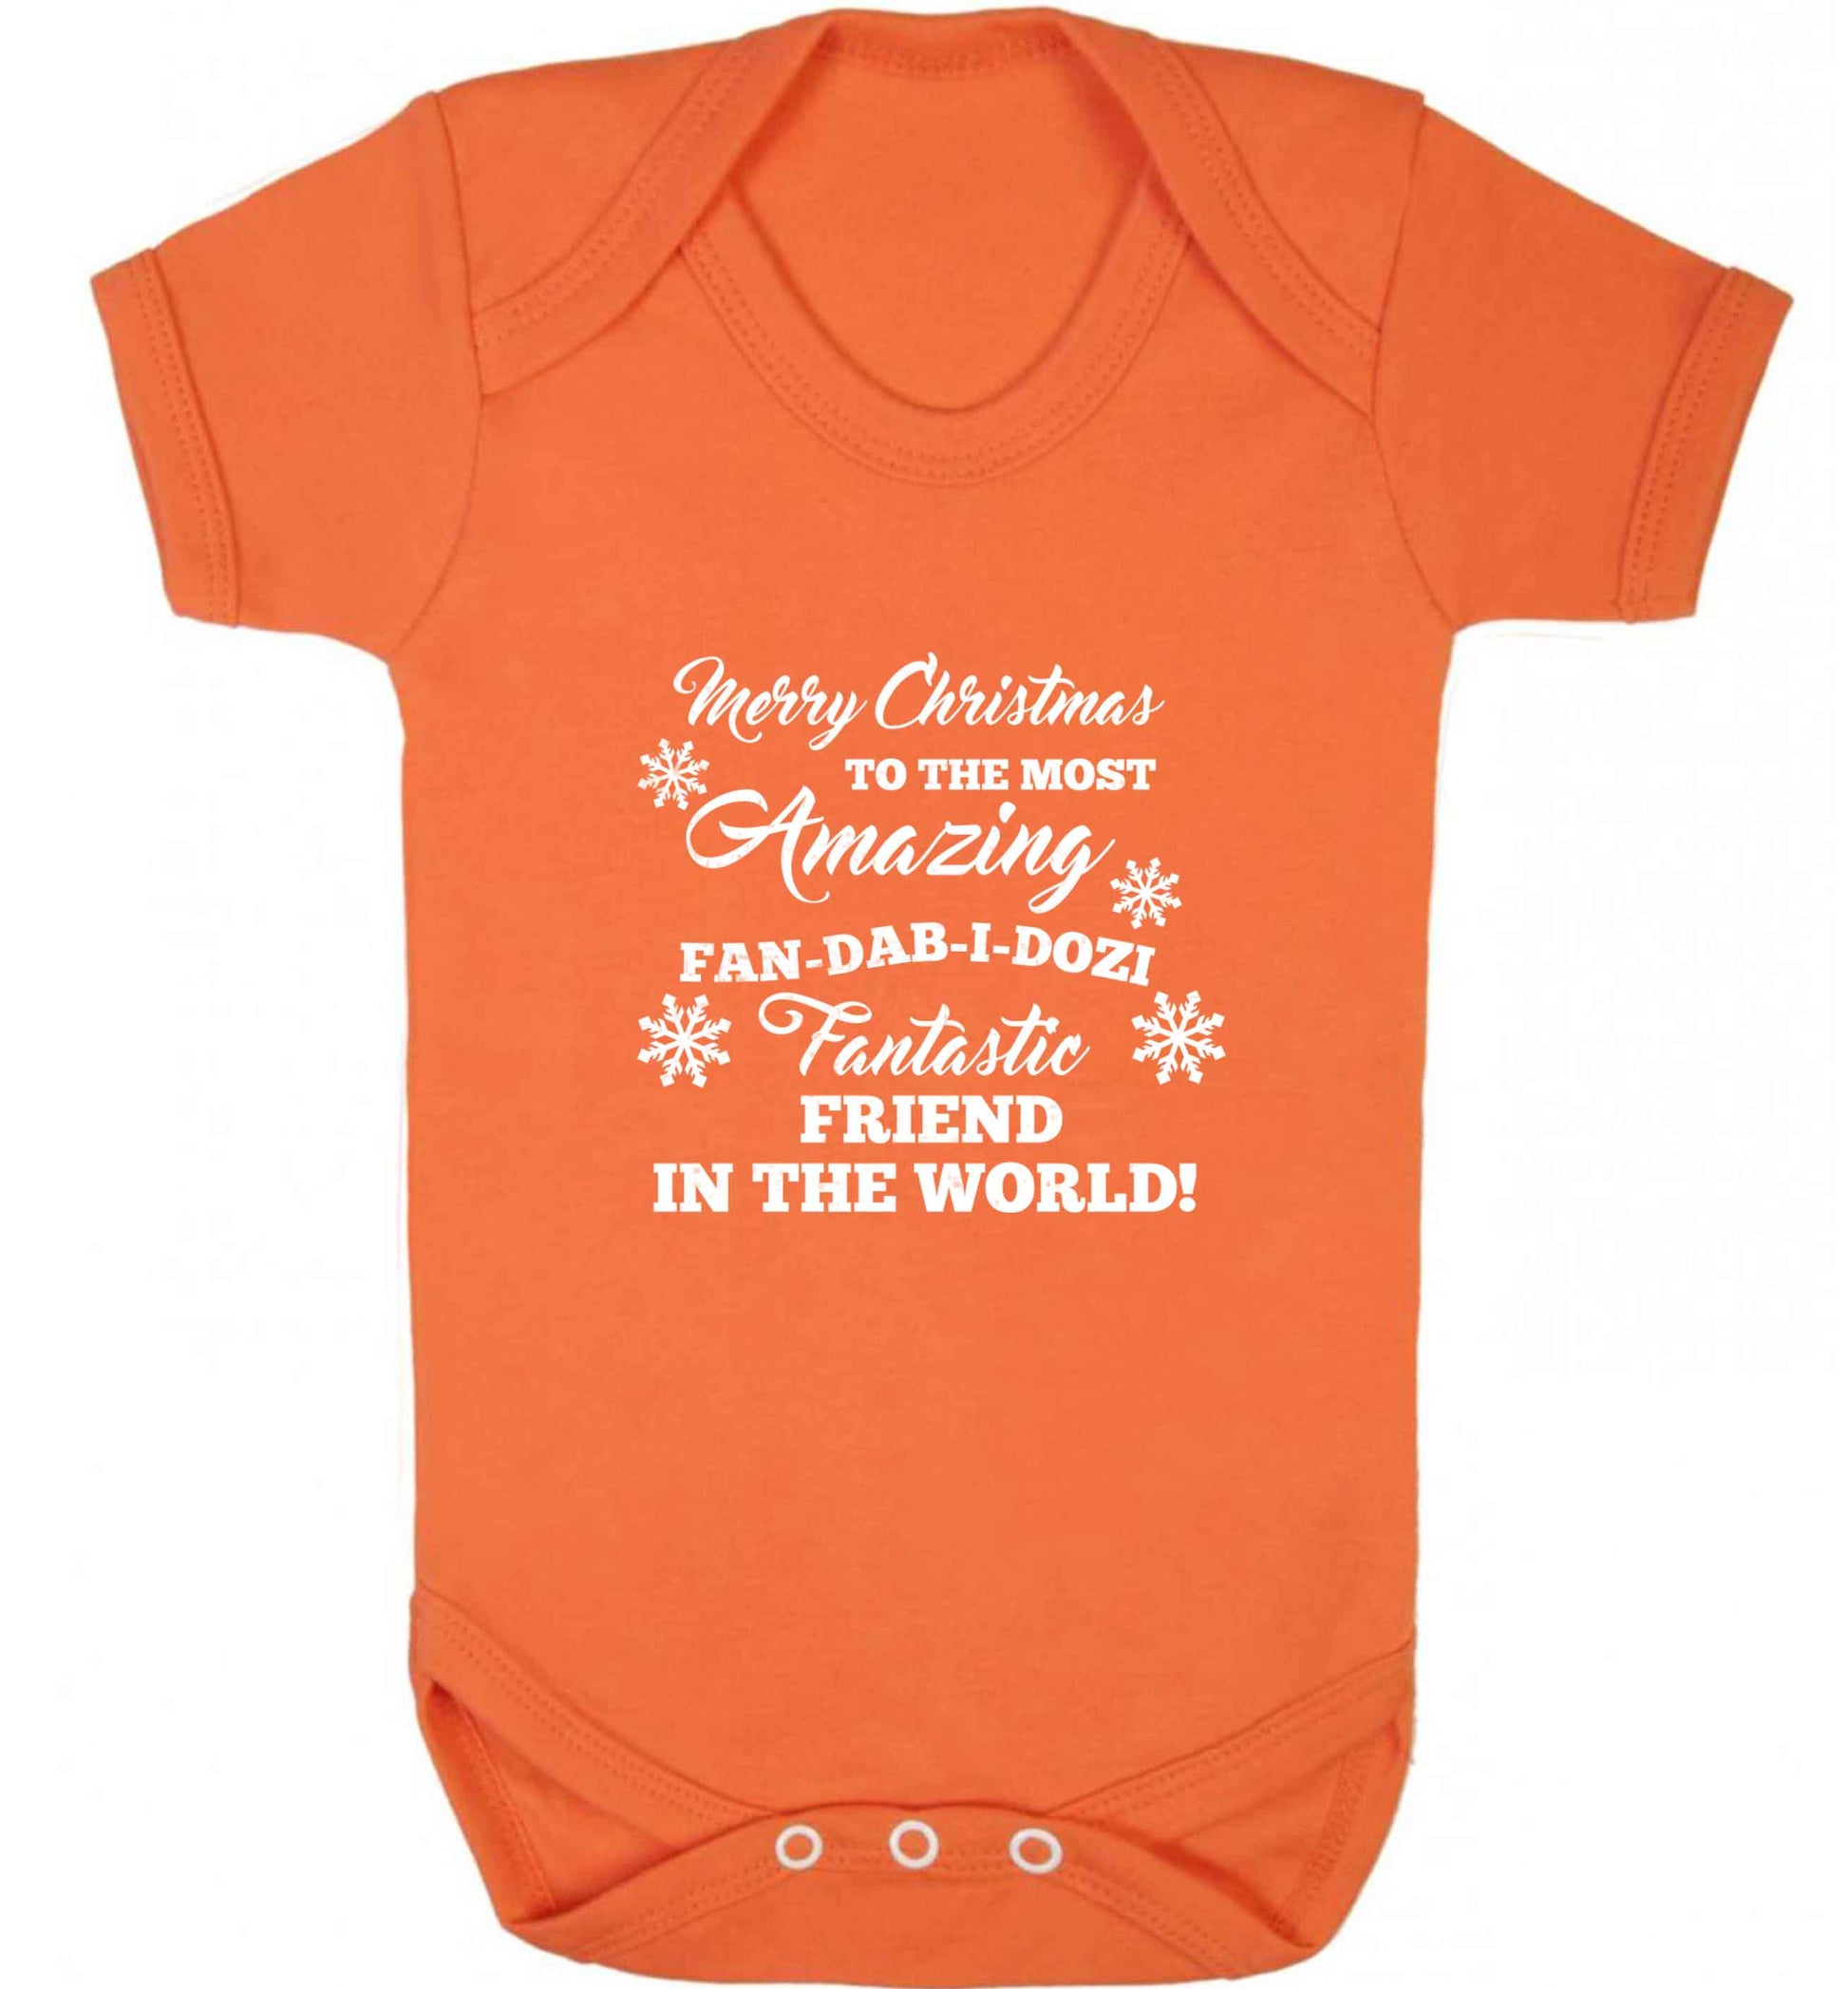 Merry Christmas to the most amazing fan-dab-i-dozi fantasic friend in the world baby vest orange 18-24 months